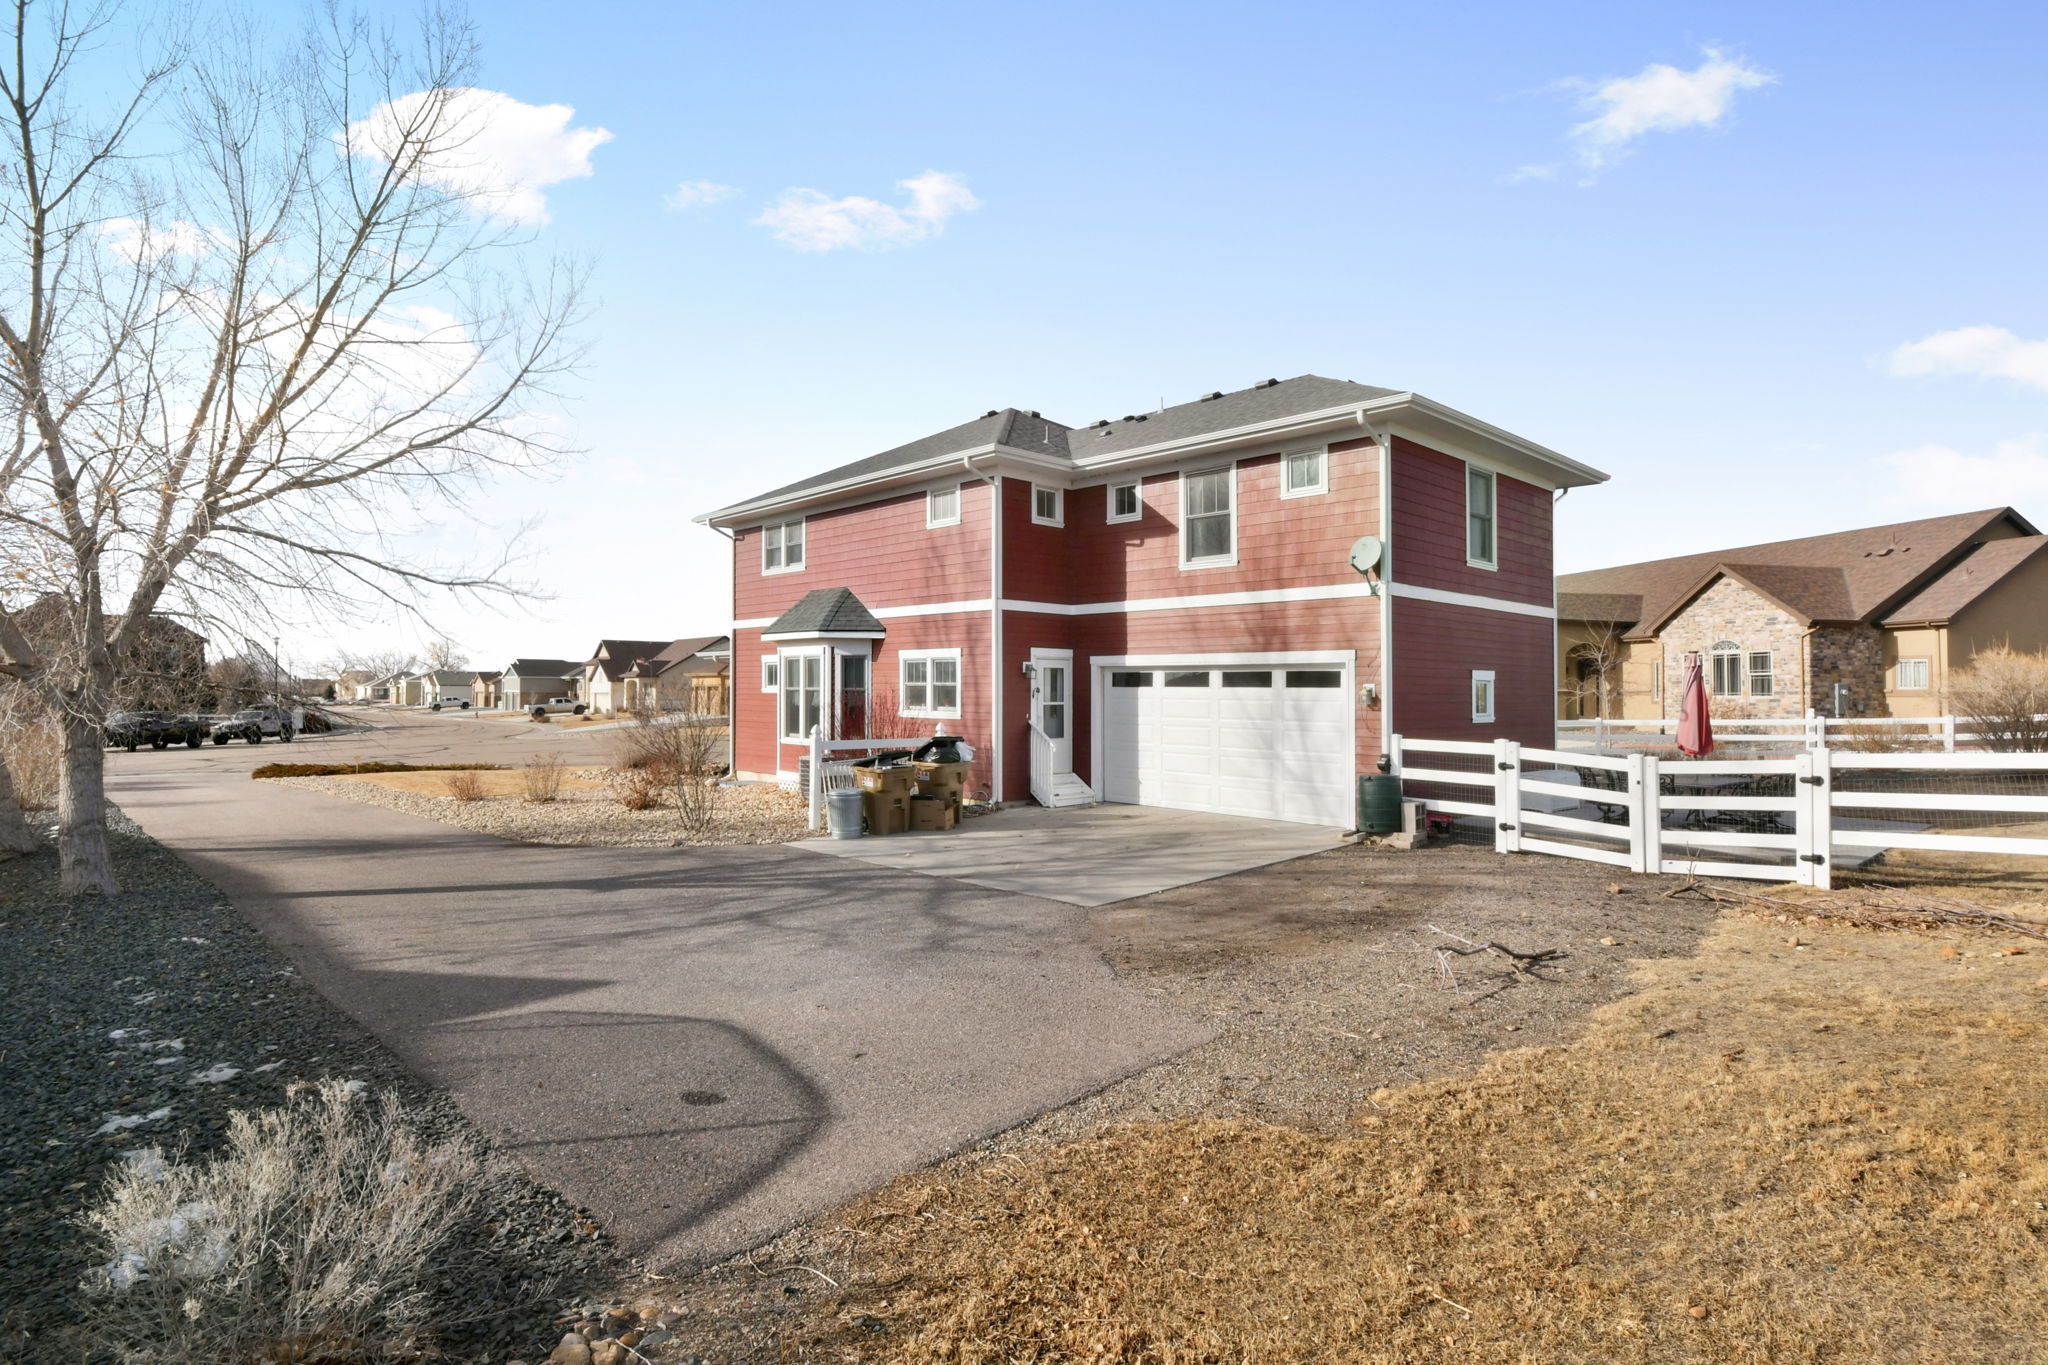  126 S Trail Blazer Rd, Fort Lupton, CO 80621, US Photo 40